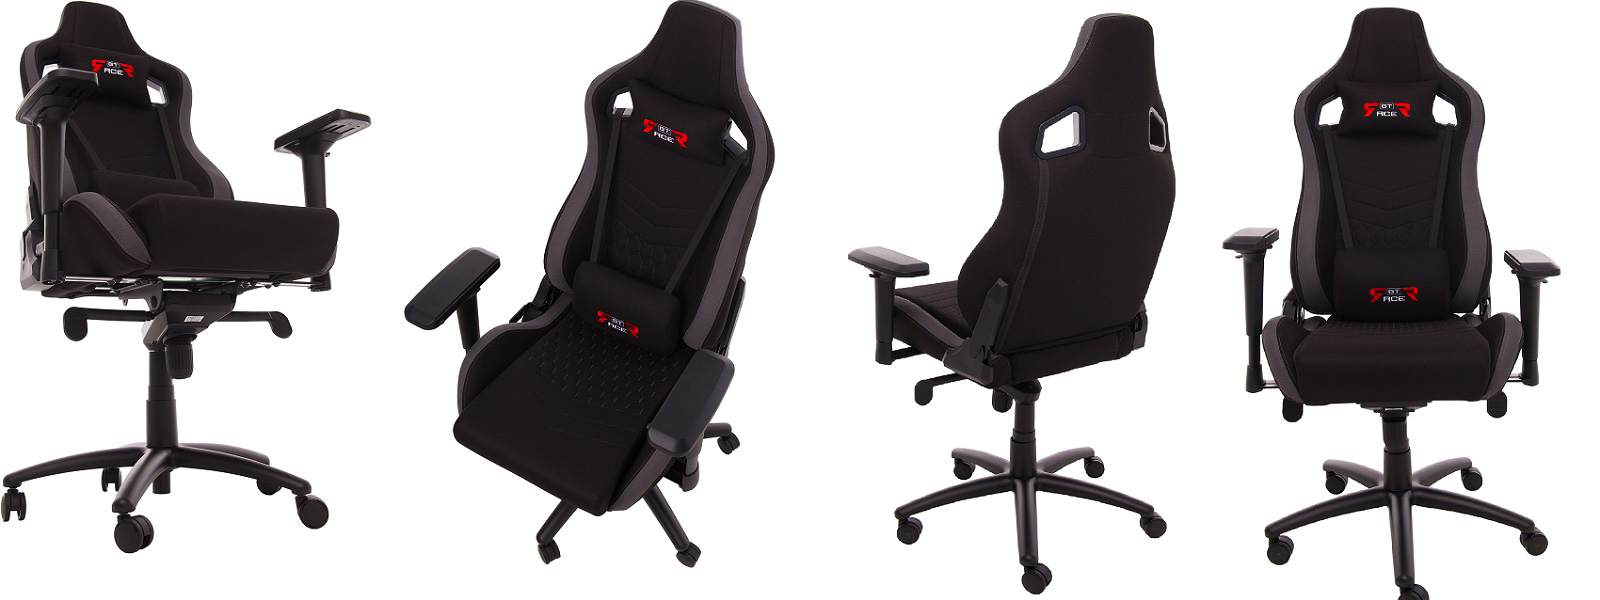 The construction of gaming chairs